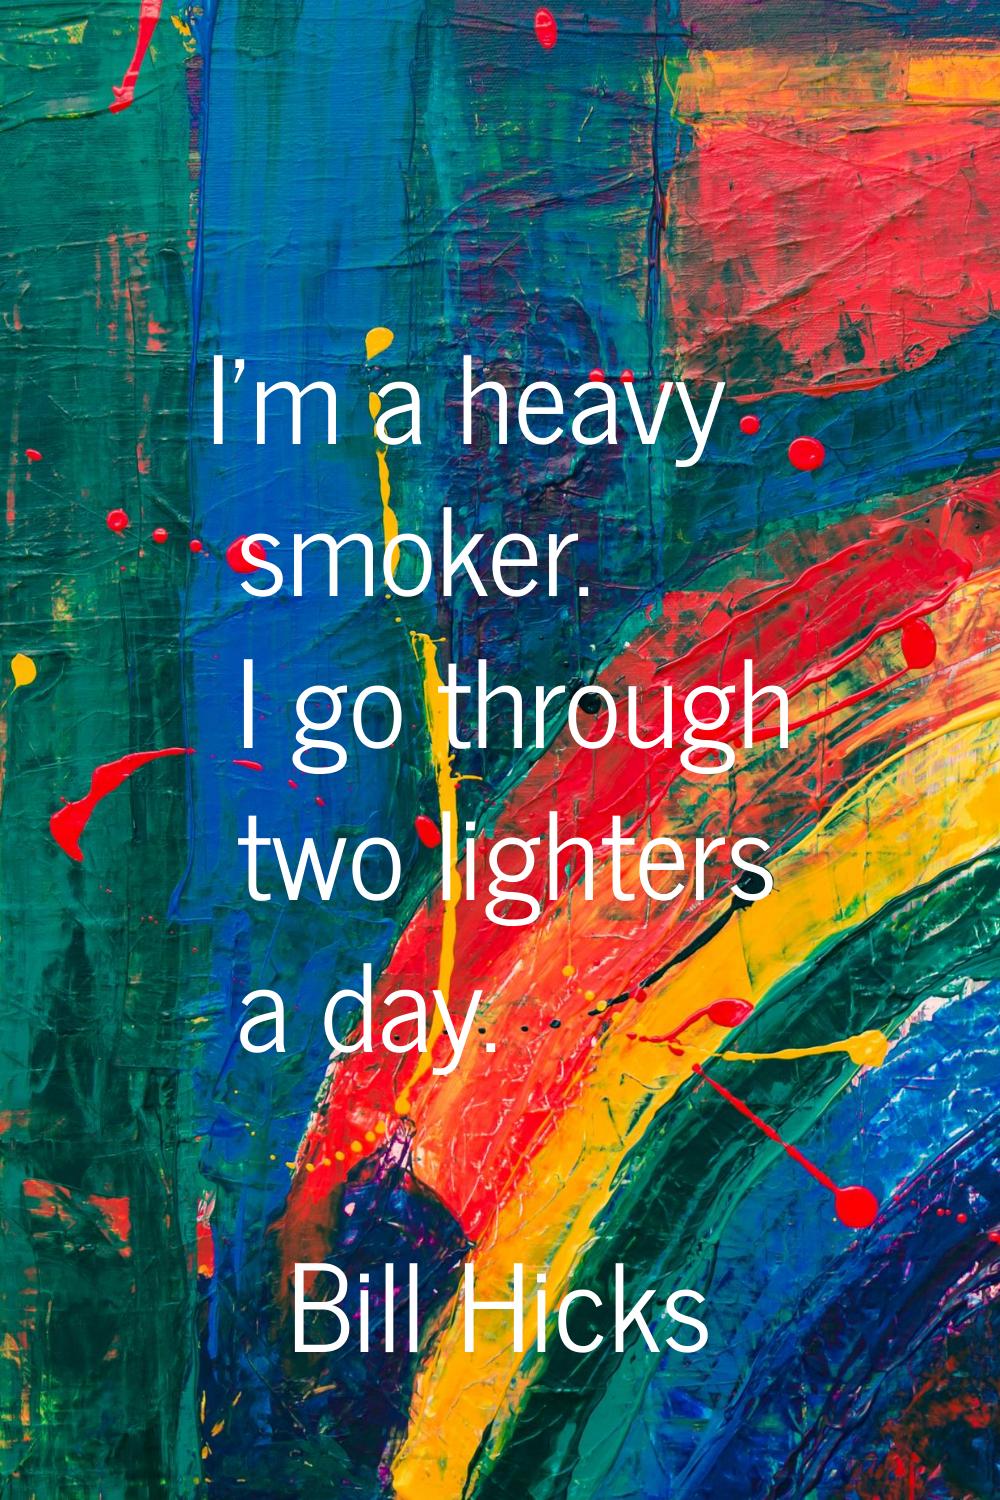 I'm a heavy smoker. I go through two lighters a day.